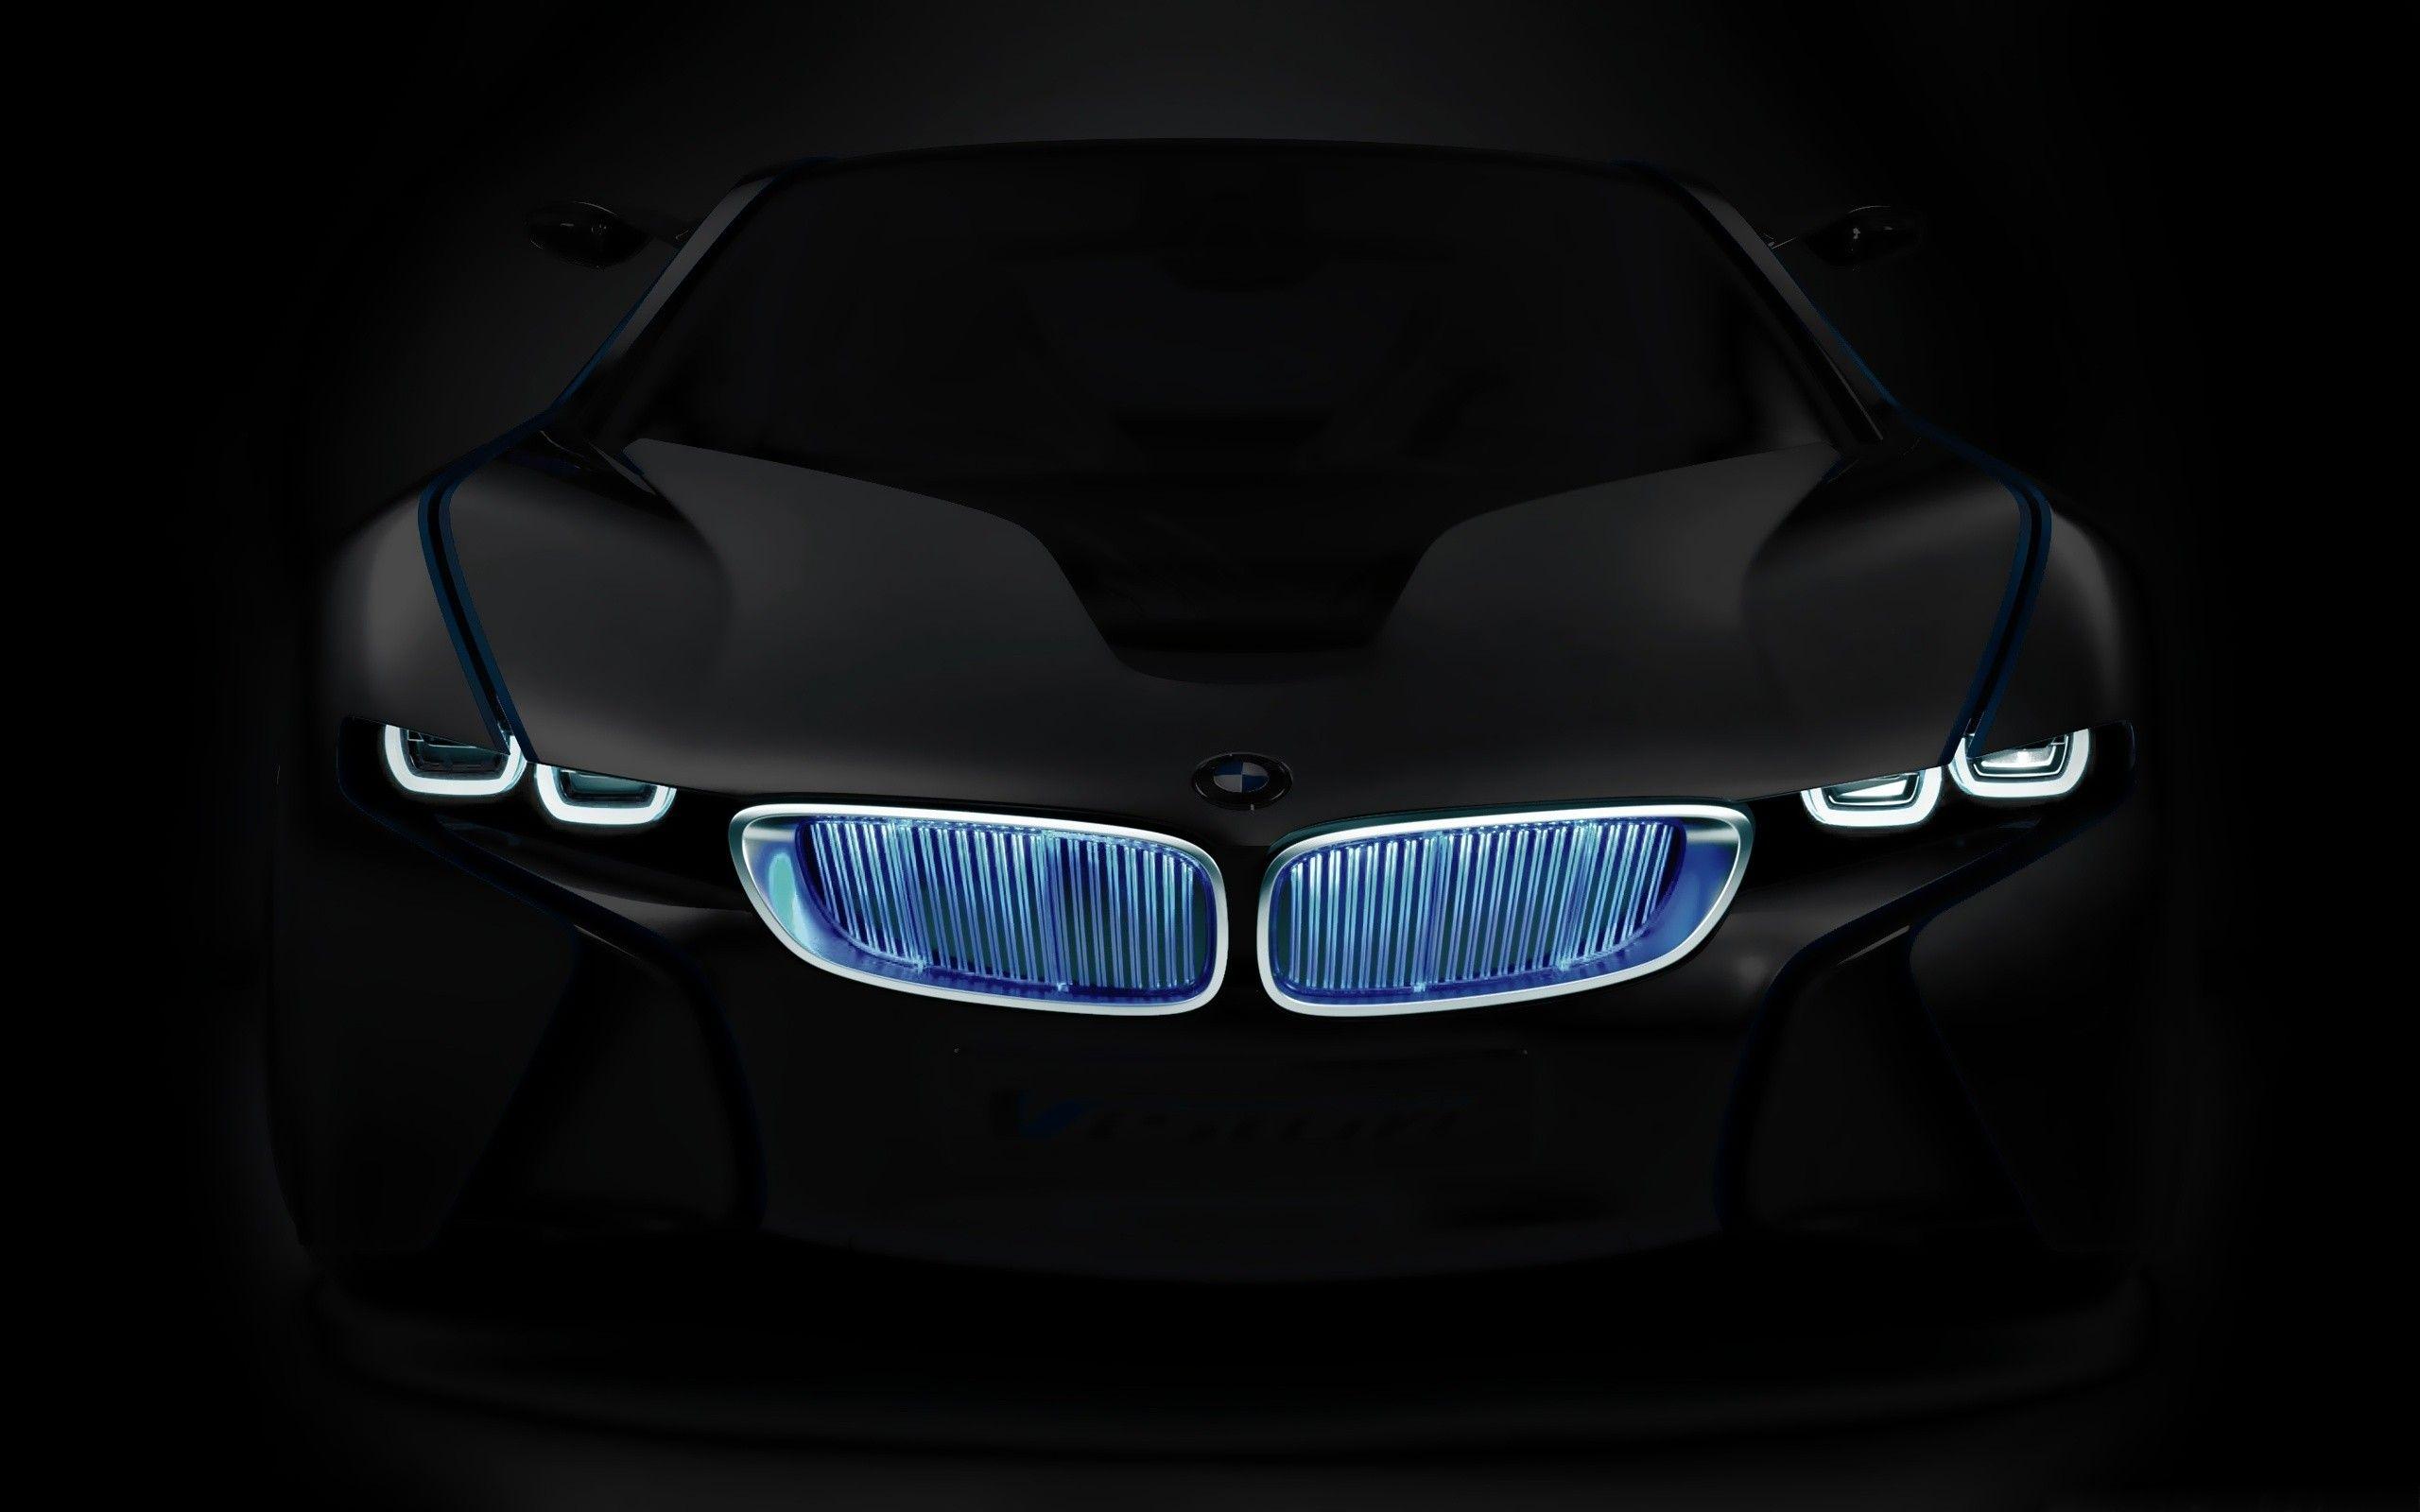 Bmw Cars Wallpapers Hd